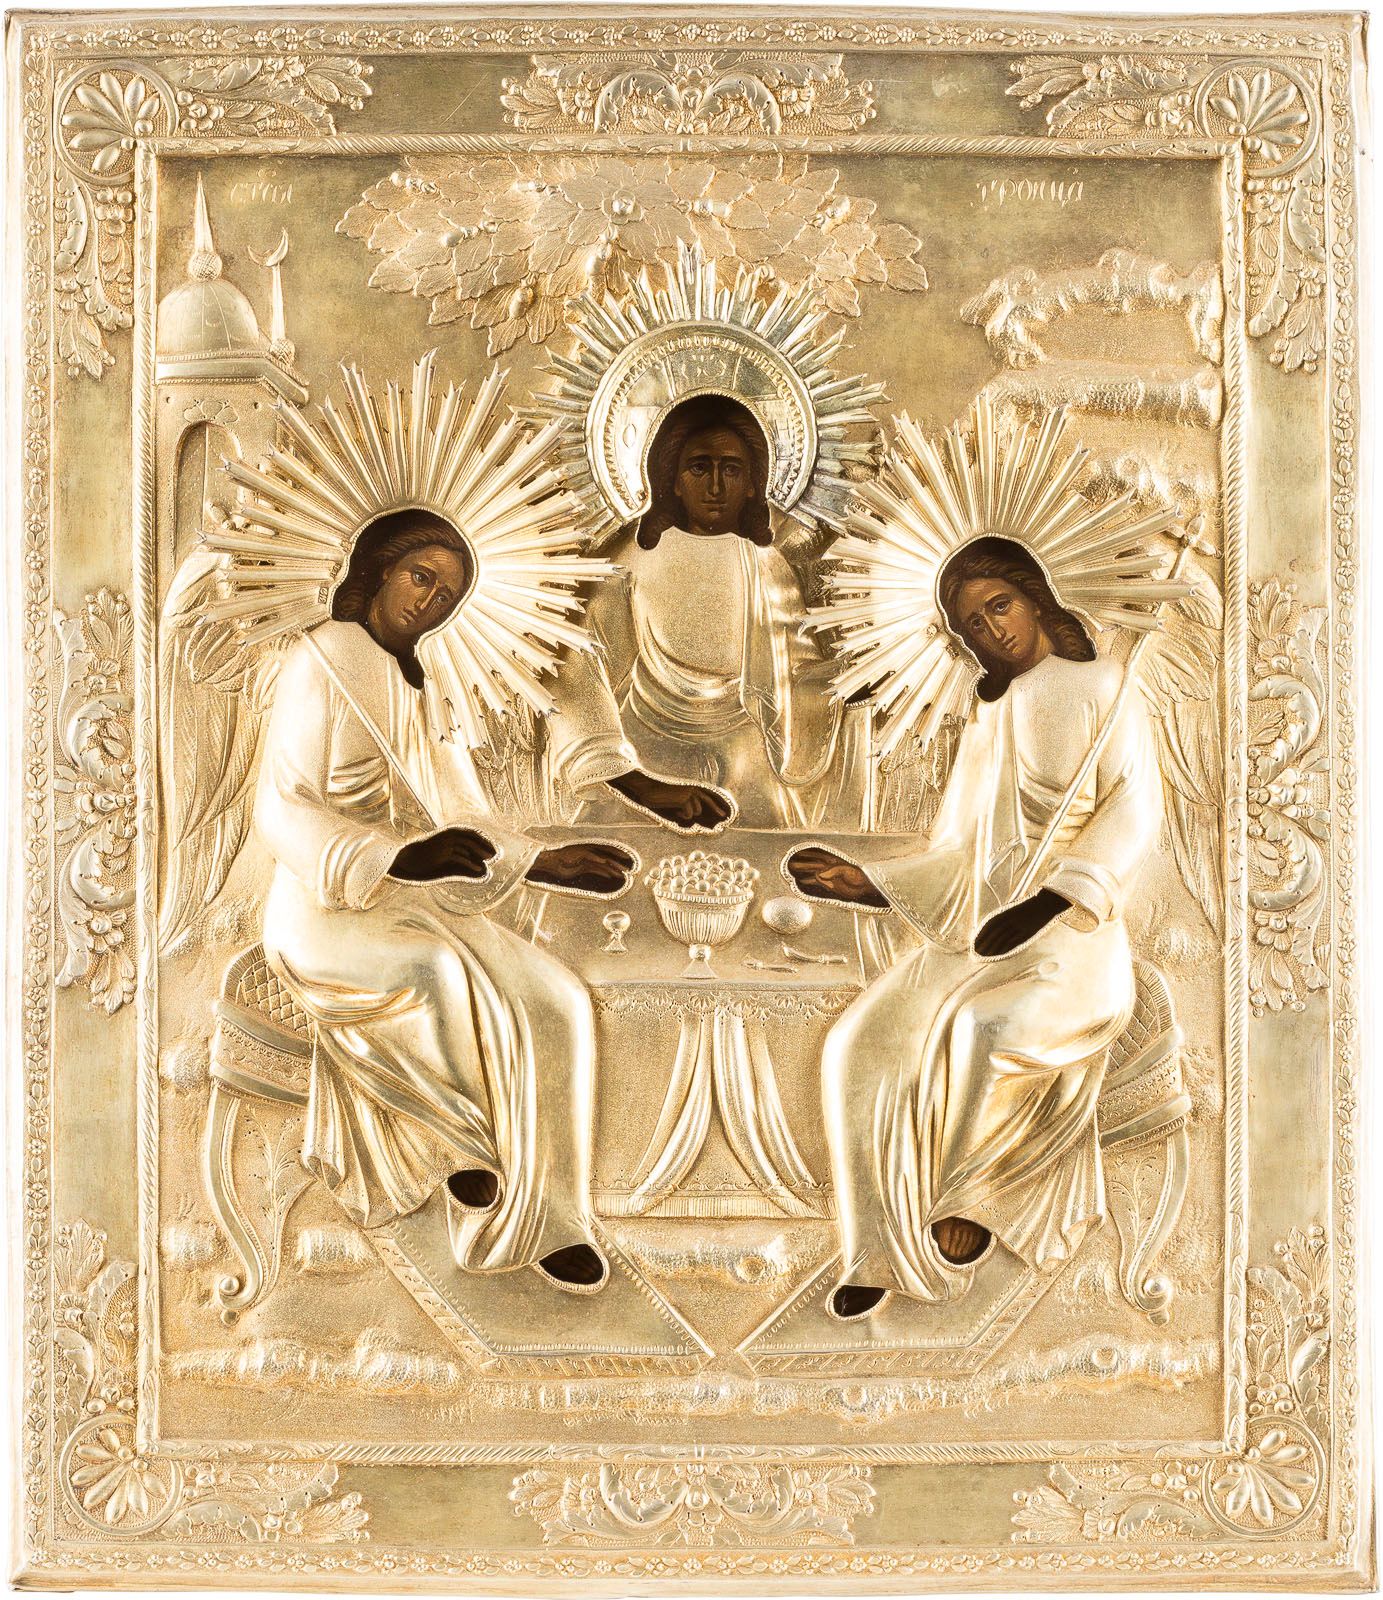 AN ICON SHOWING THE OLD TESTAMENT TRINITY WITH A SILVER-GIL UN ICONO QUE MUESTRA&hellip;